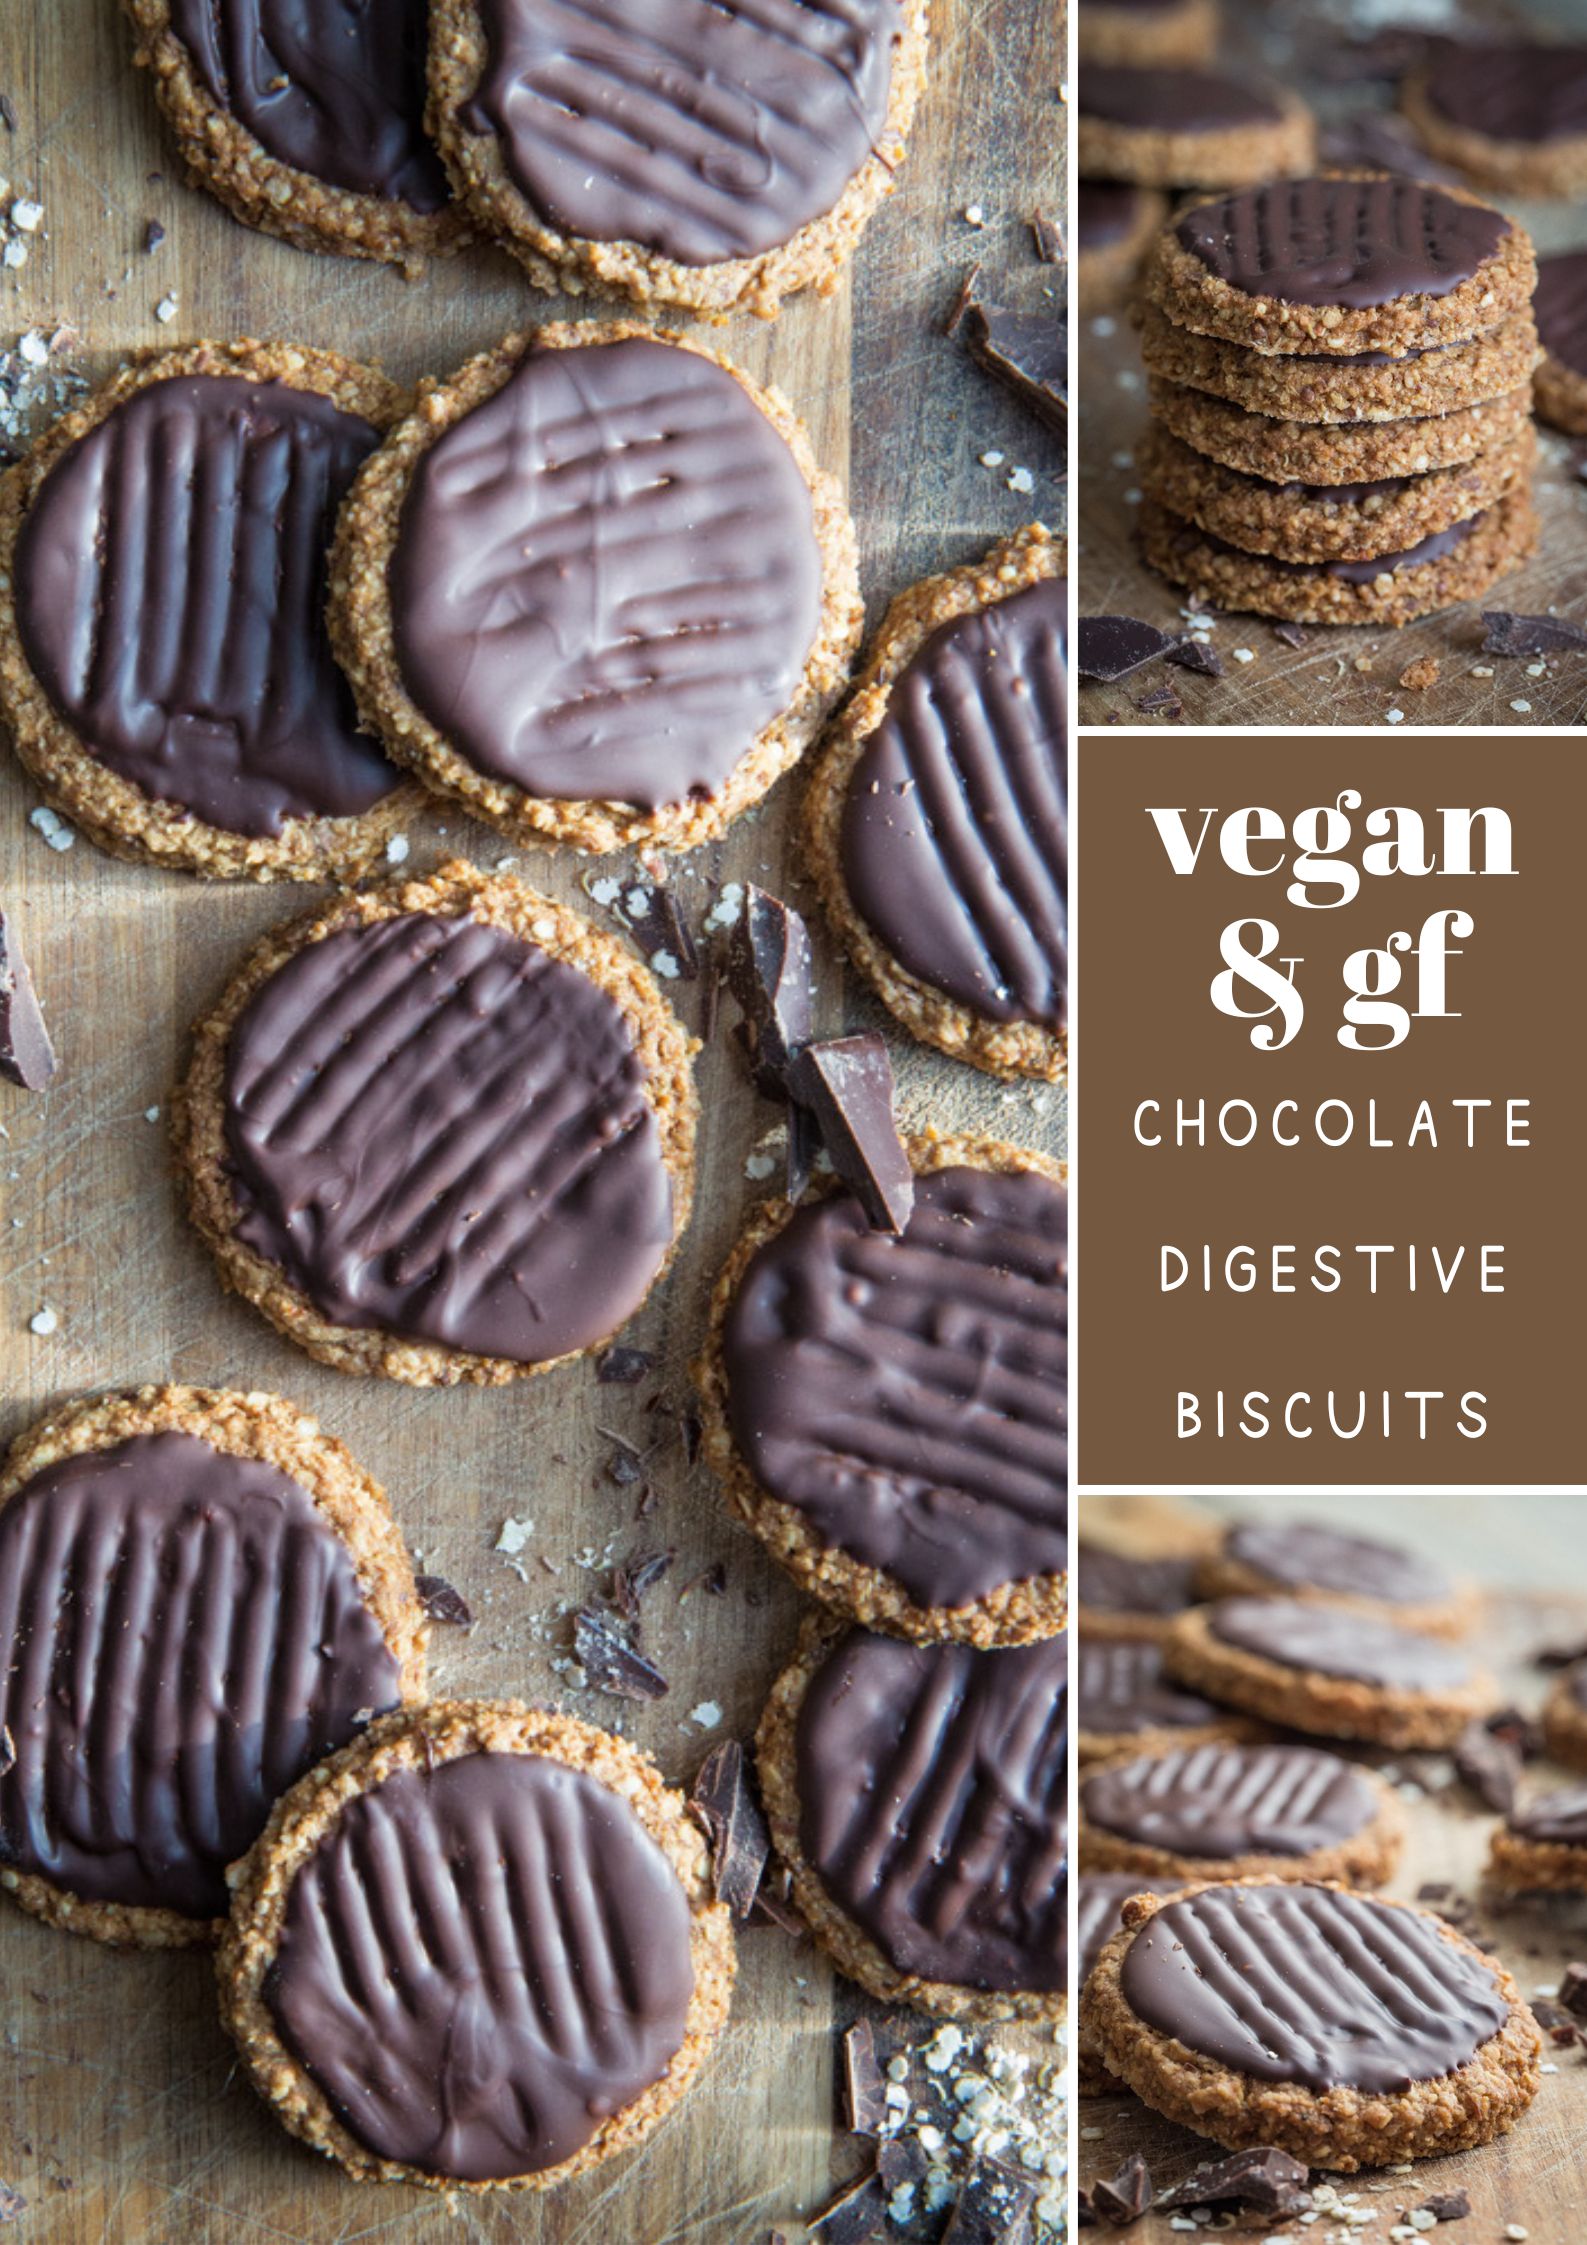 Thick, chewy, oaty biscuits slathered in dark chocolate, these digestive biscuits are for people who take their biscuits seriously! They're also vegan, gluten free, really easy to make and perfect with a cuppa #glutenfree #digestivebiscuits #homemadebiscuits #veganbiscuits